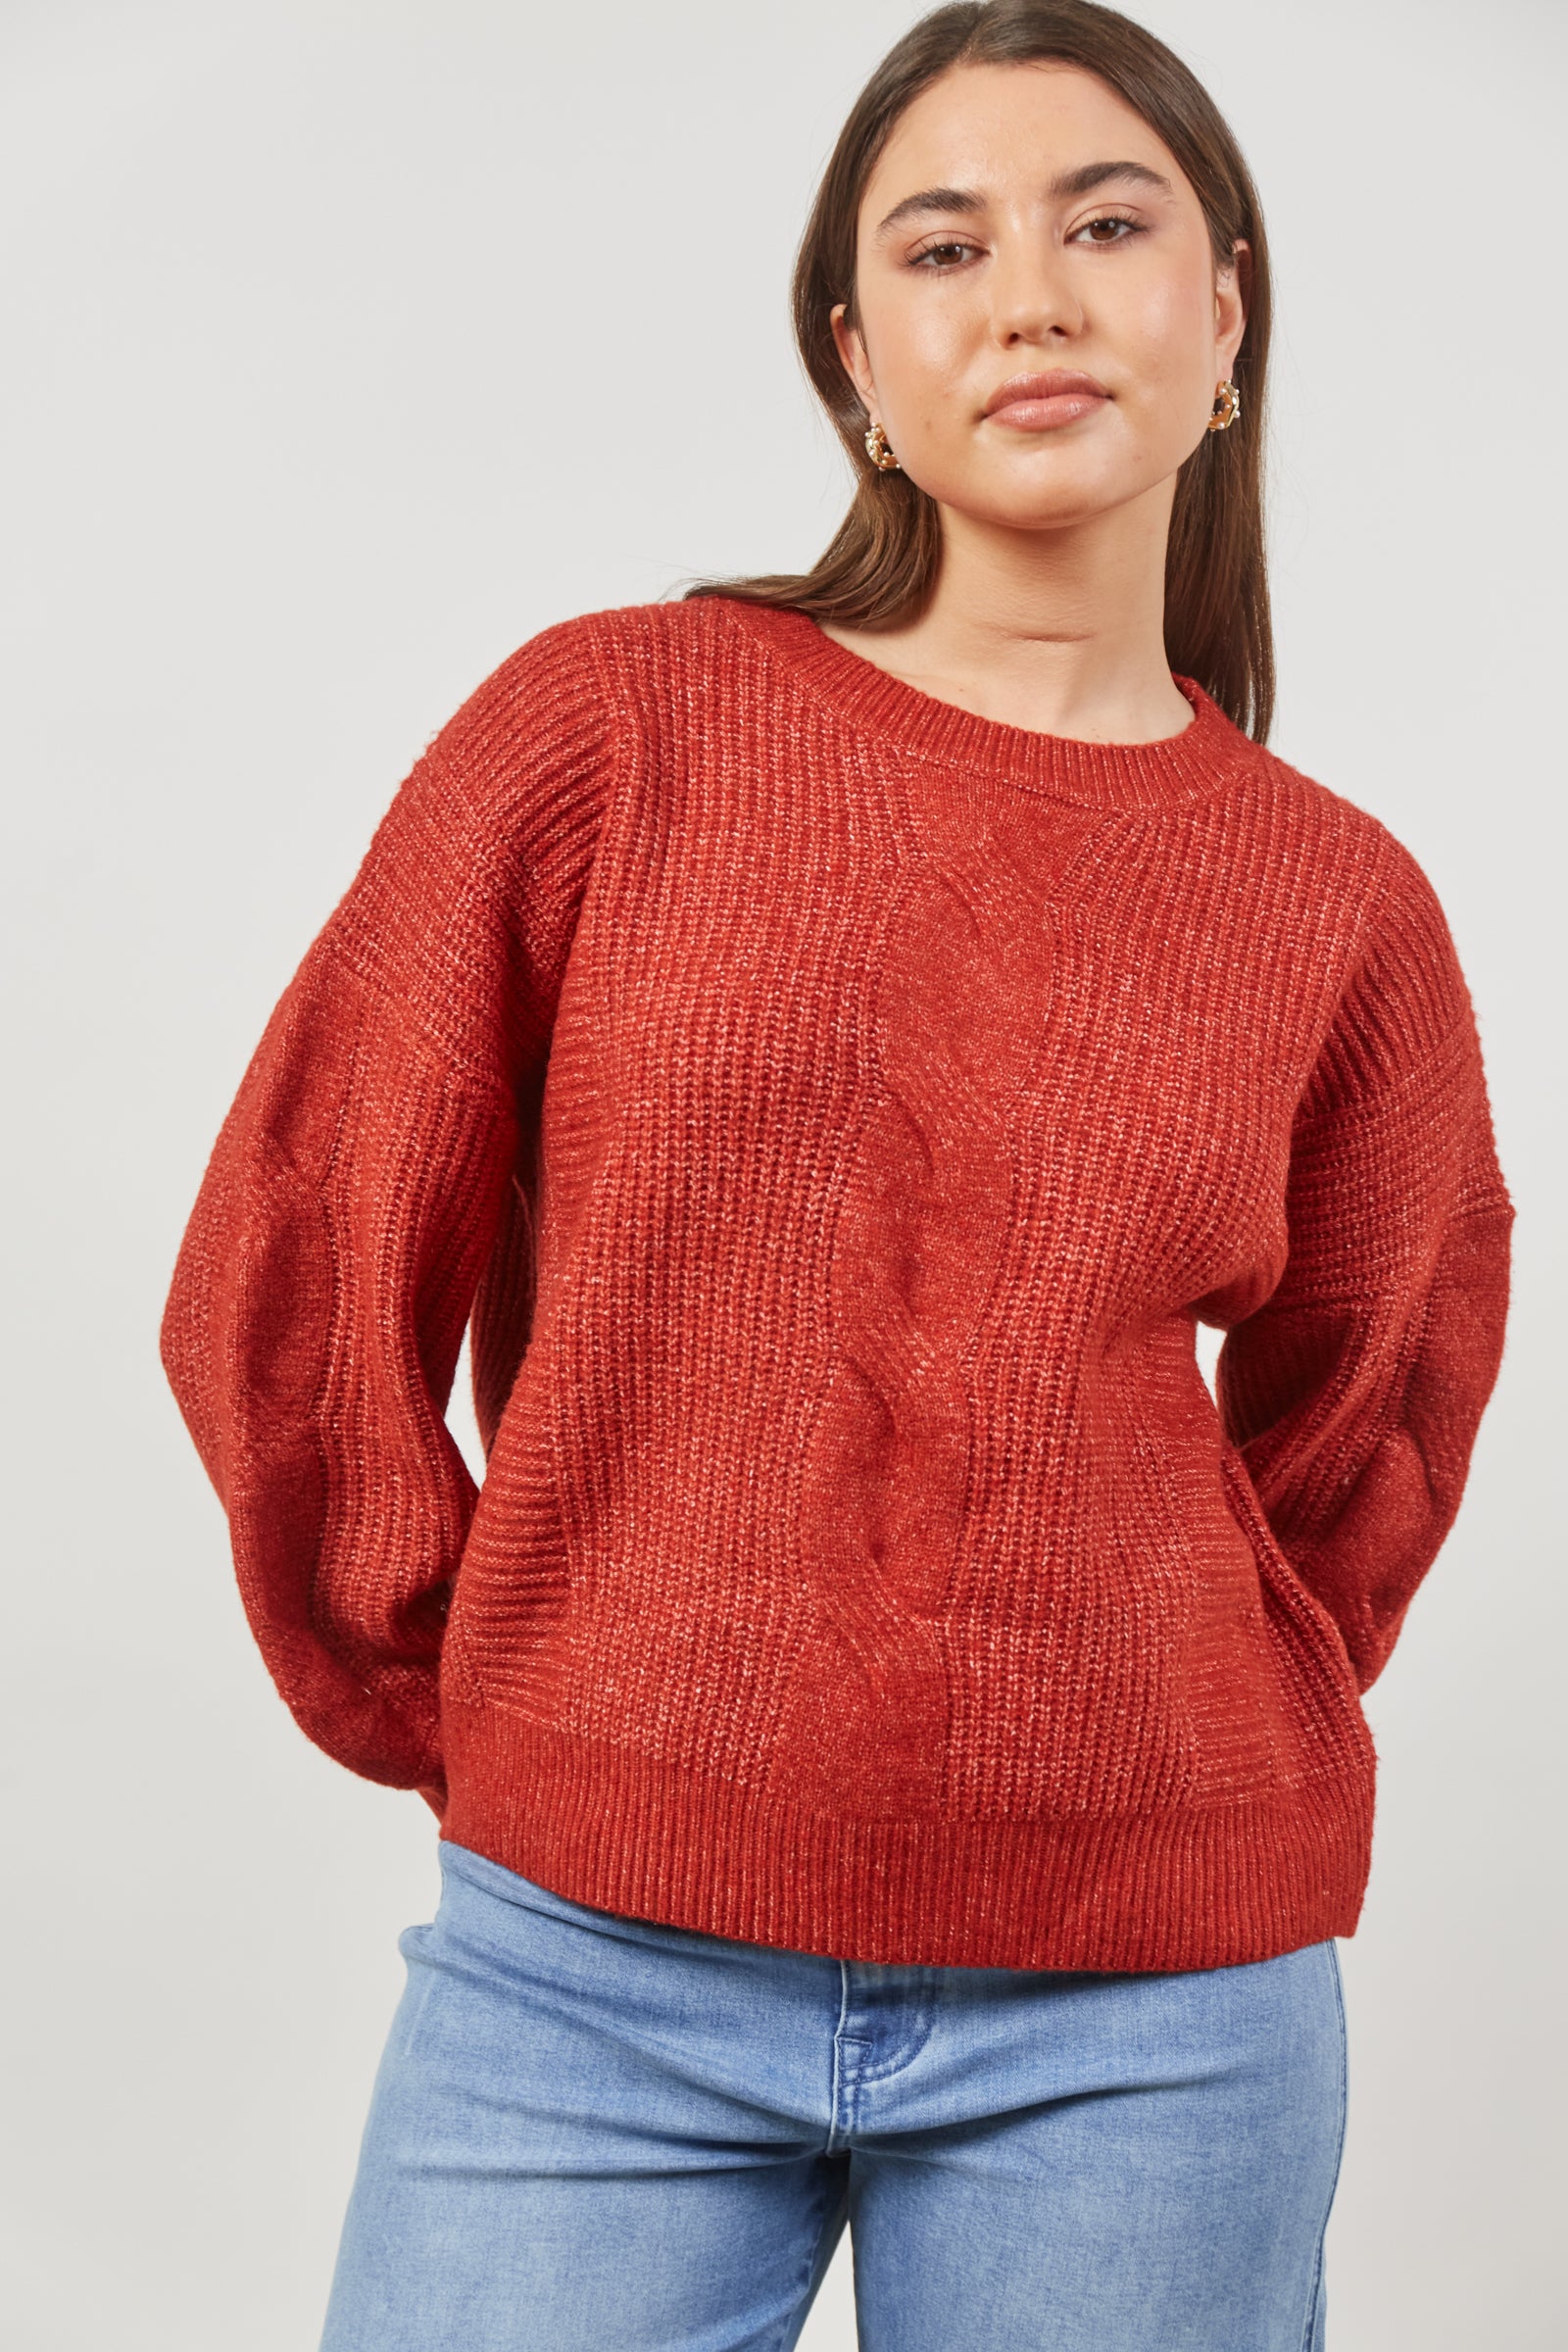 Renew Jumper - Picante - Isle of Mine Clothing - Knit Jumper